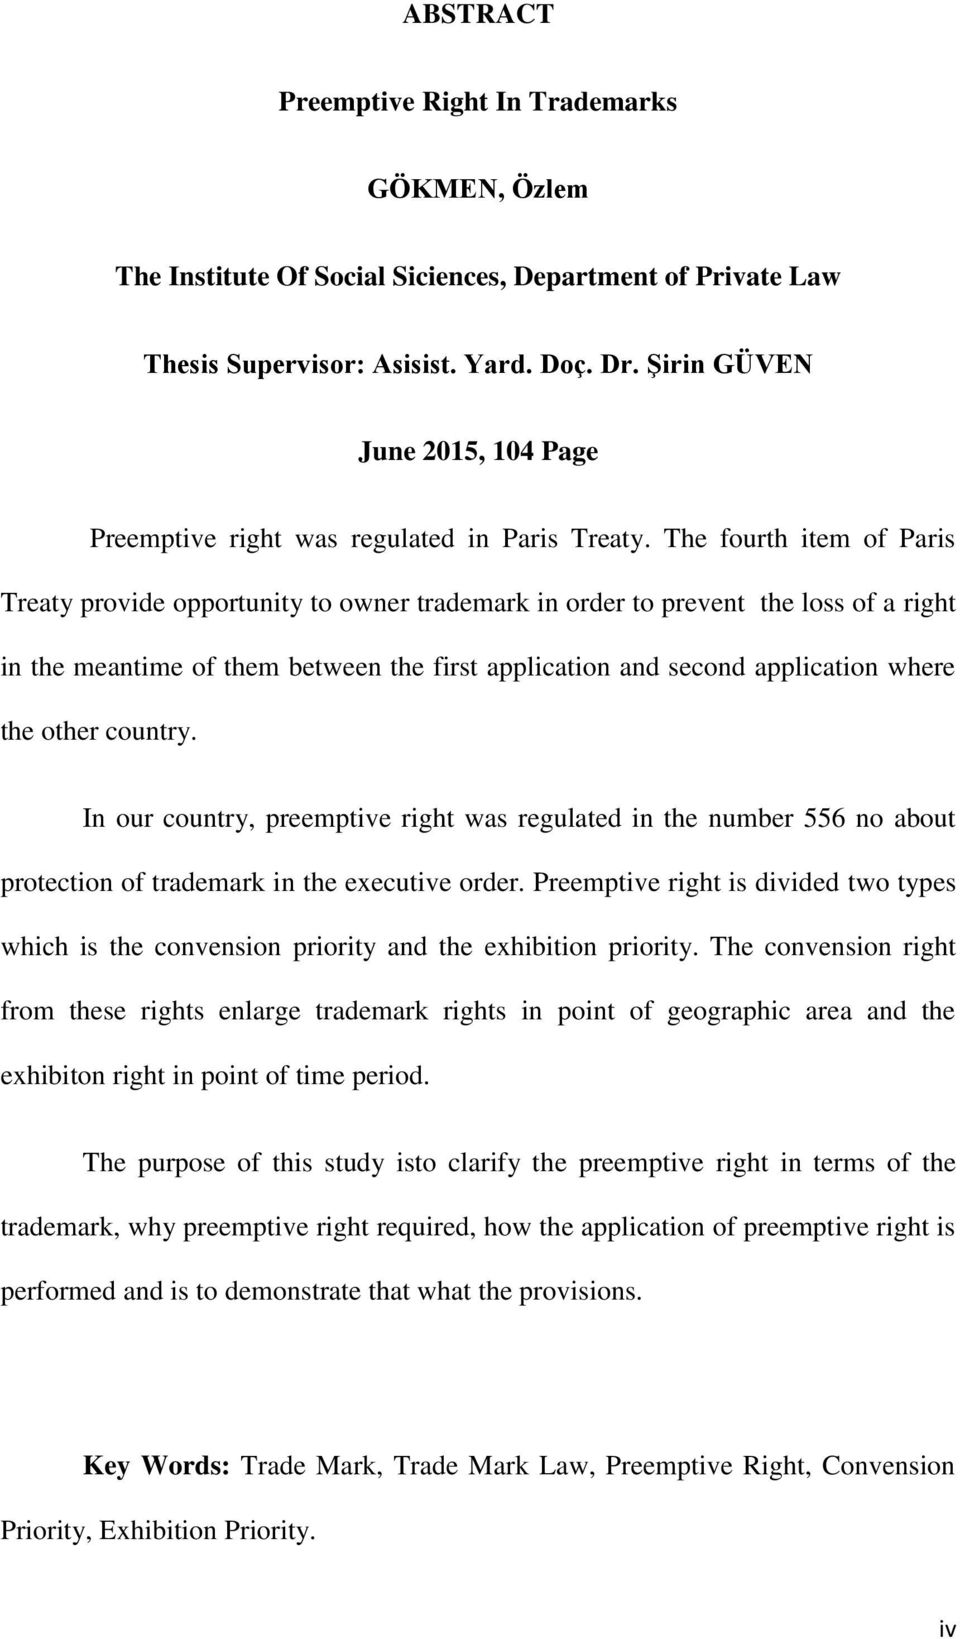 The fourth item of Paris Treaty provide opportunity to owner trademark in order to prevent the loss of a right in the meantime of them between the first application and second application where the